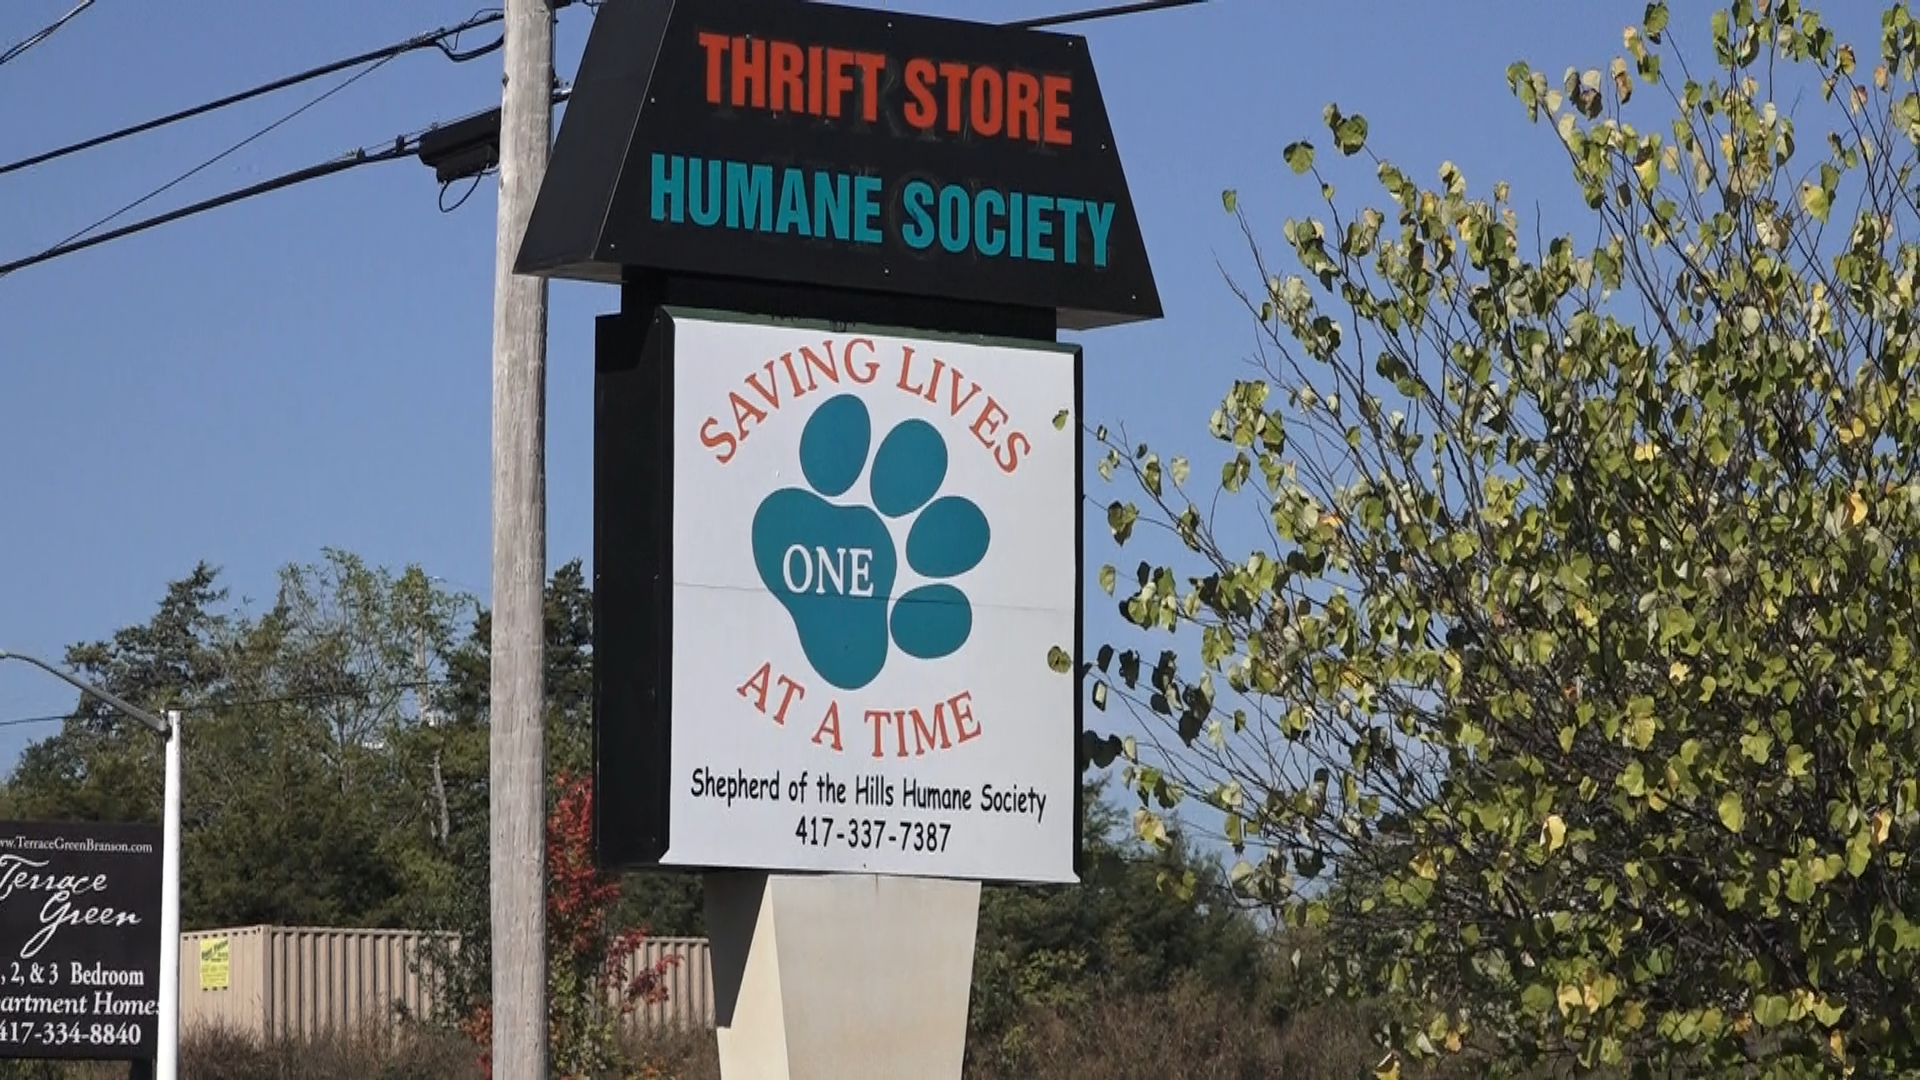 Shepherd of the hills humane society conduent call center locations